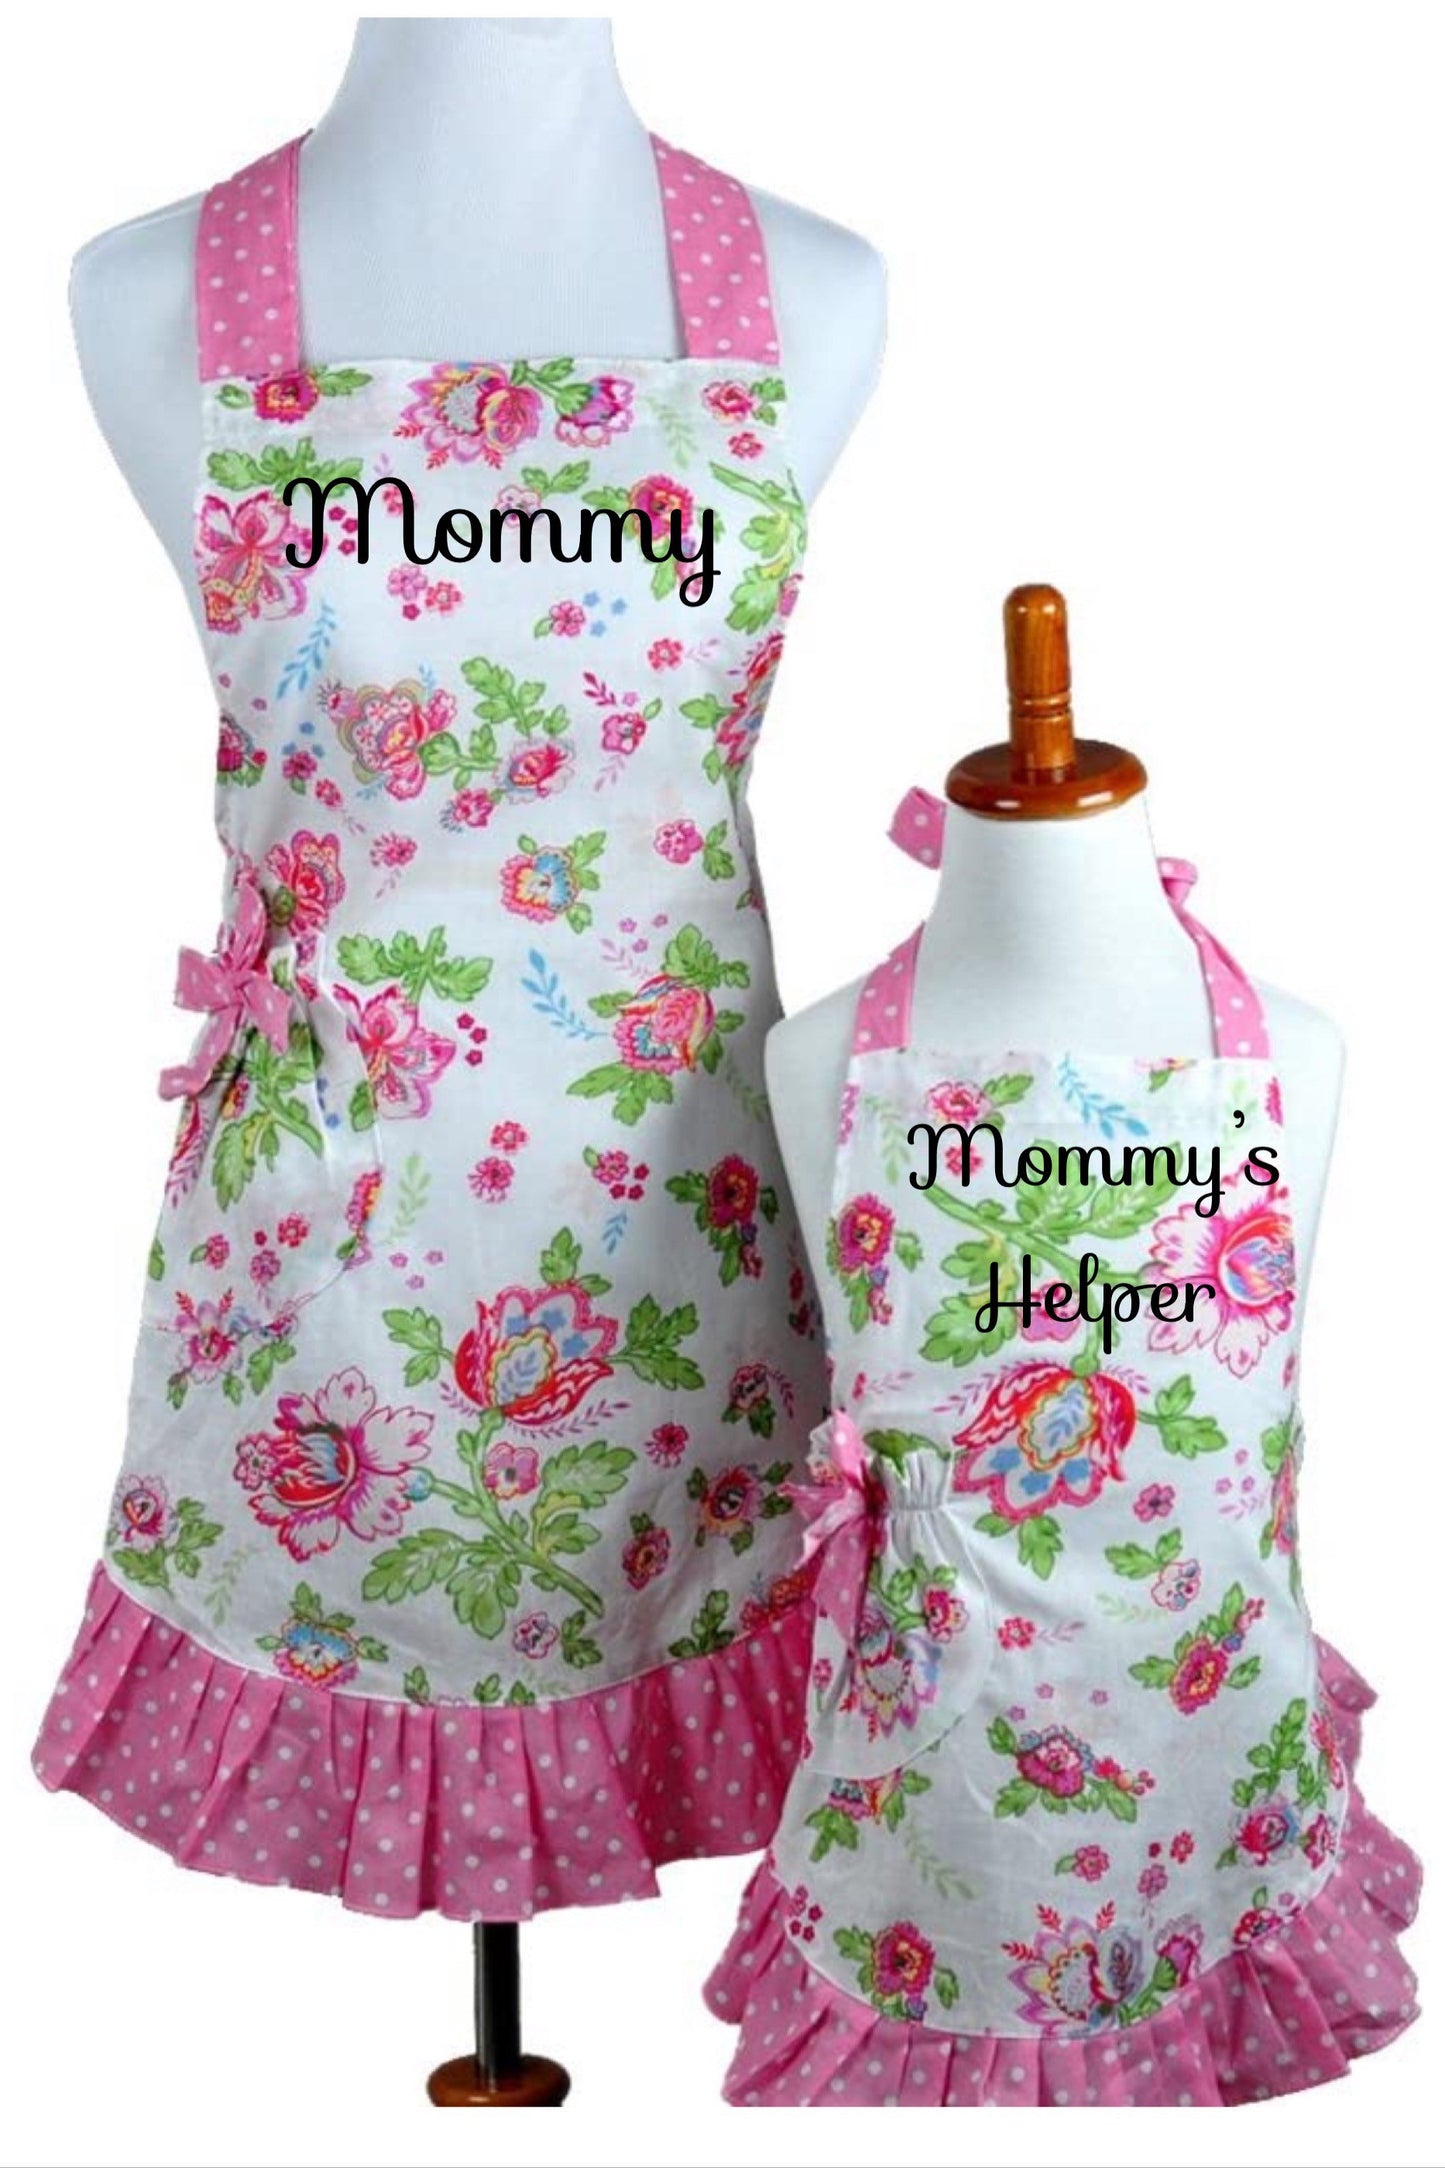 Mommy and me aprons, mom and kid cooking apron set, personalized apron, mommy and me set, cupcake apron set, matching aprons, custom aprons